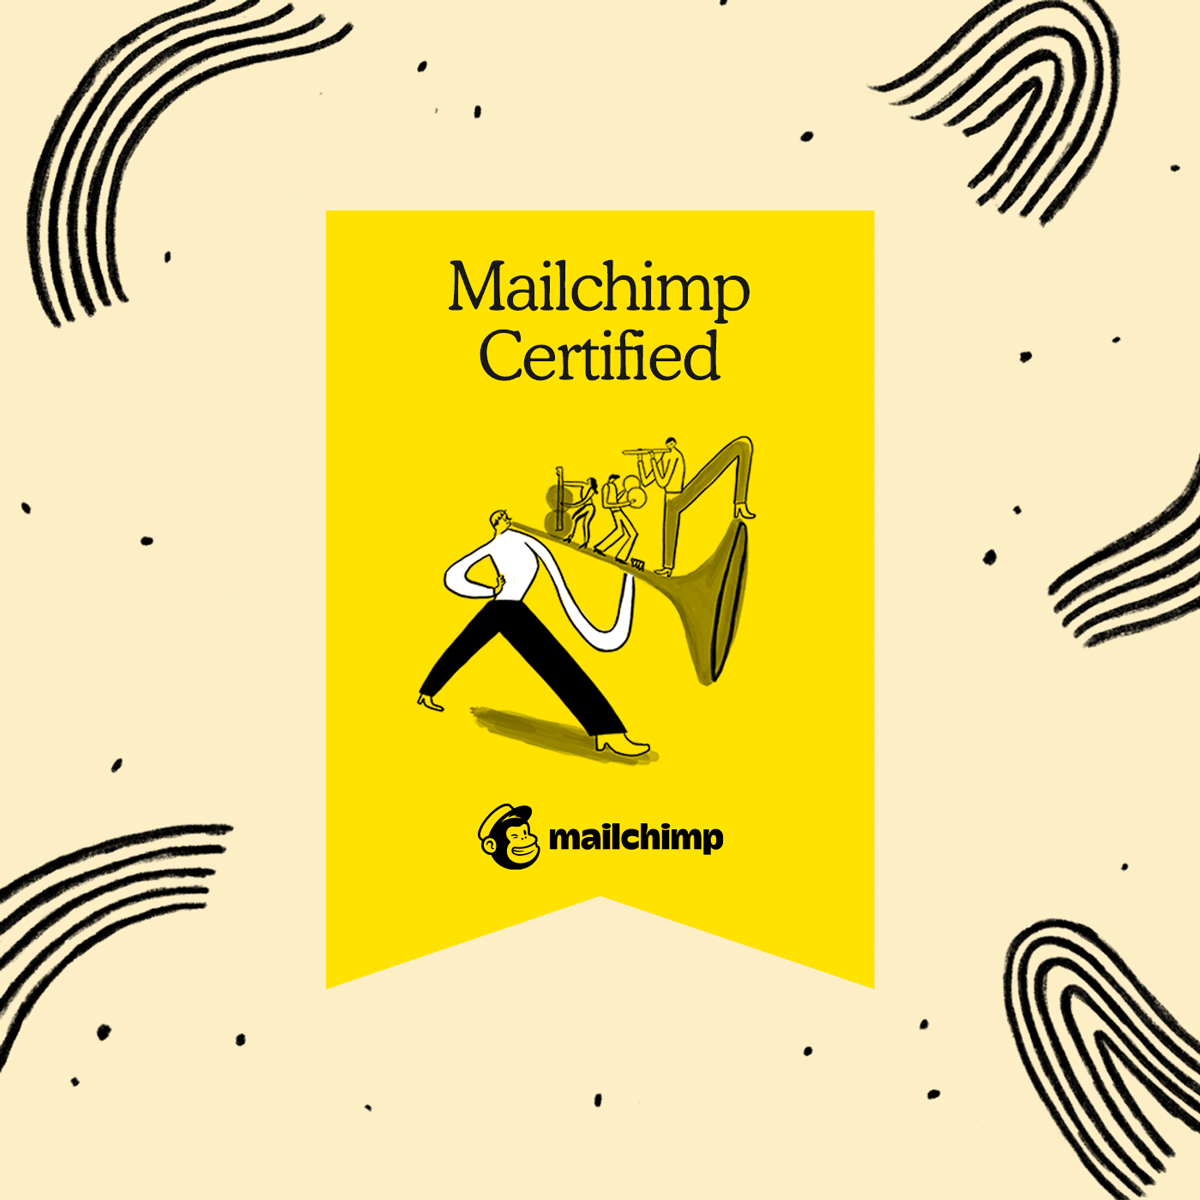 Mailchimp Certified gif